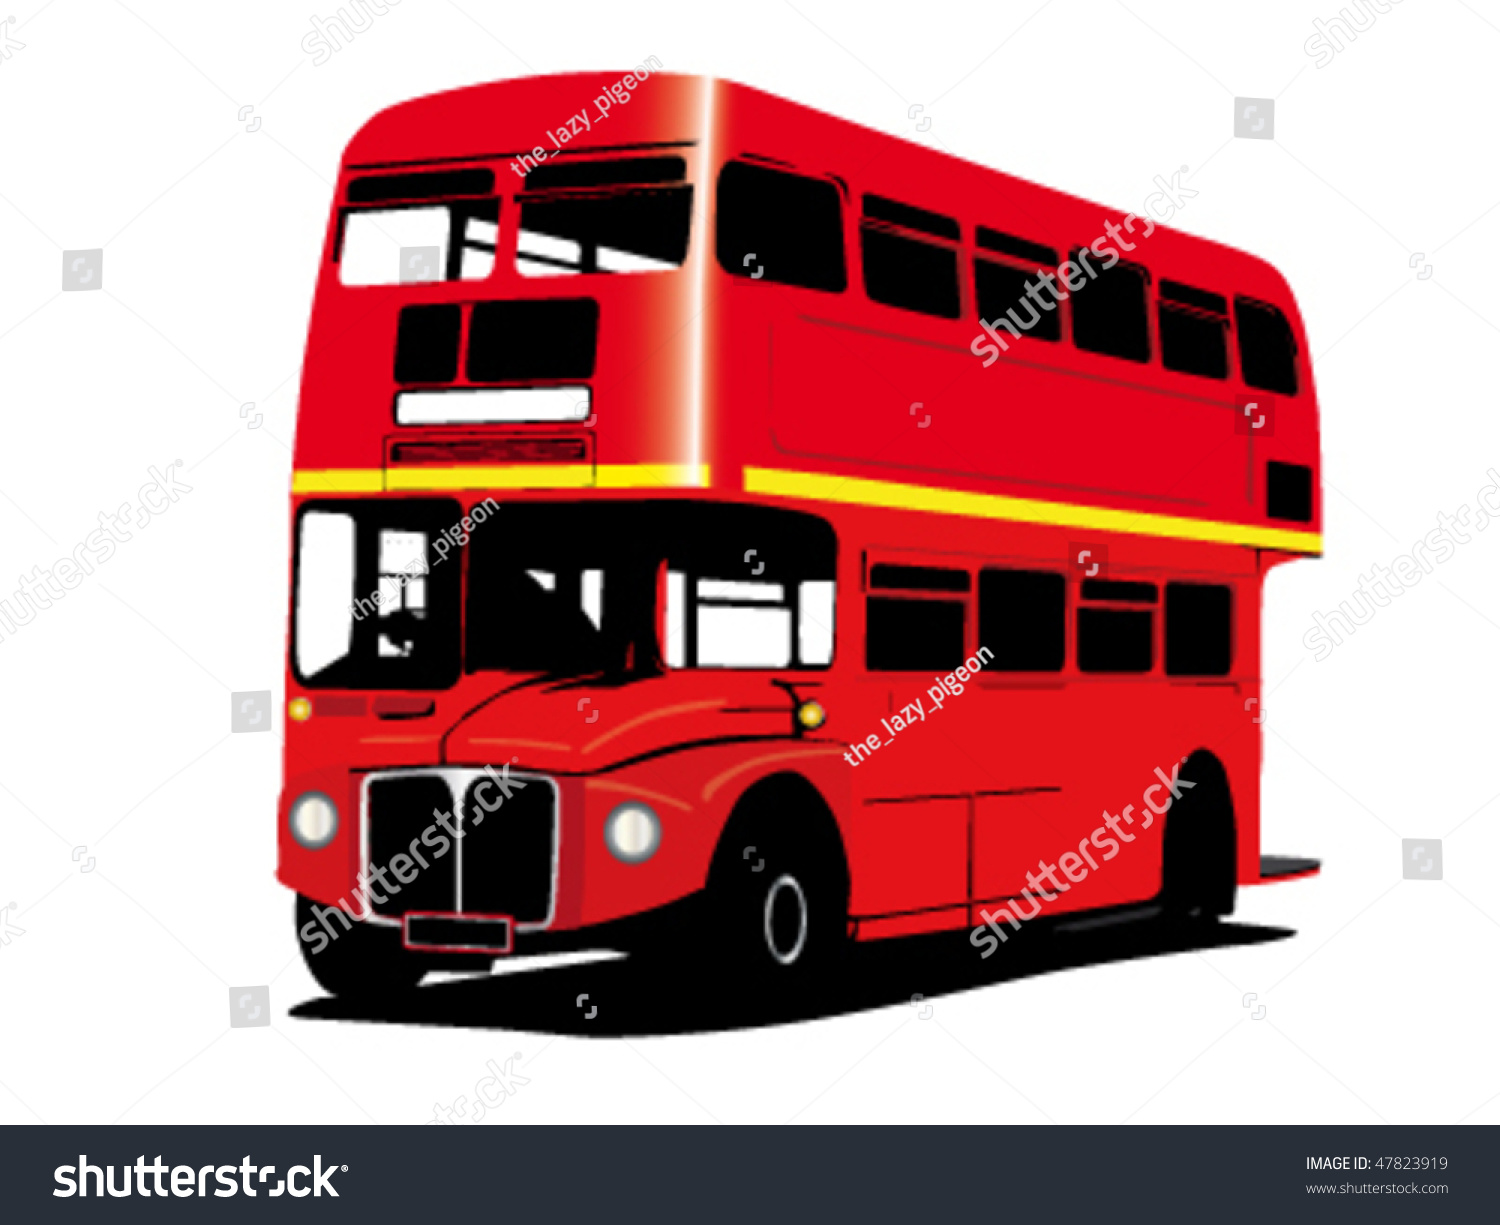 clipart red bus - photo #28